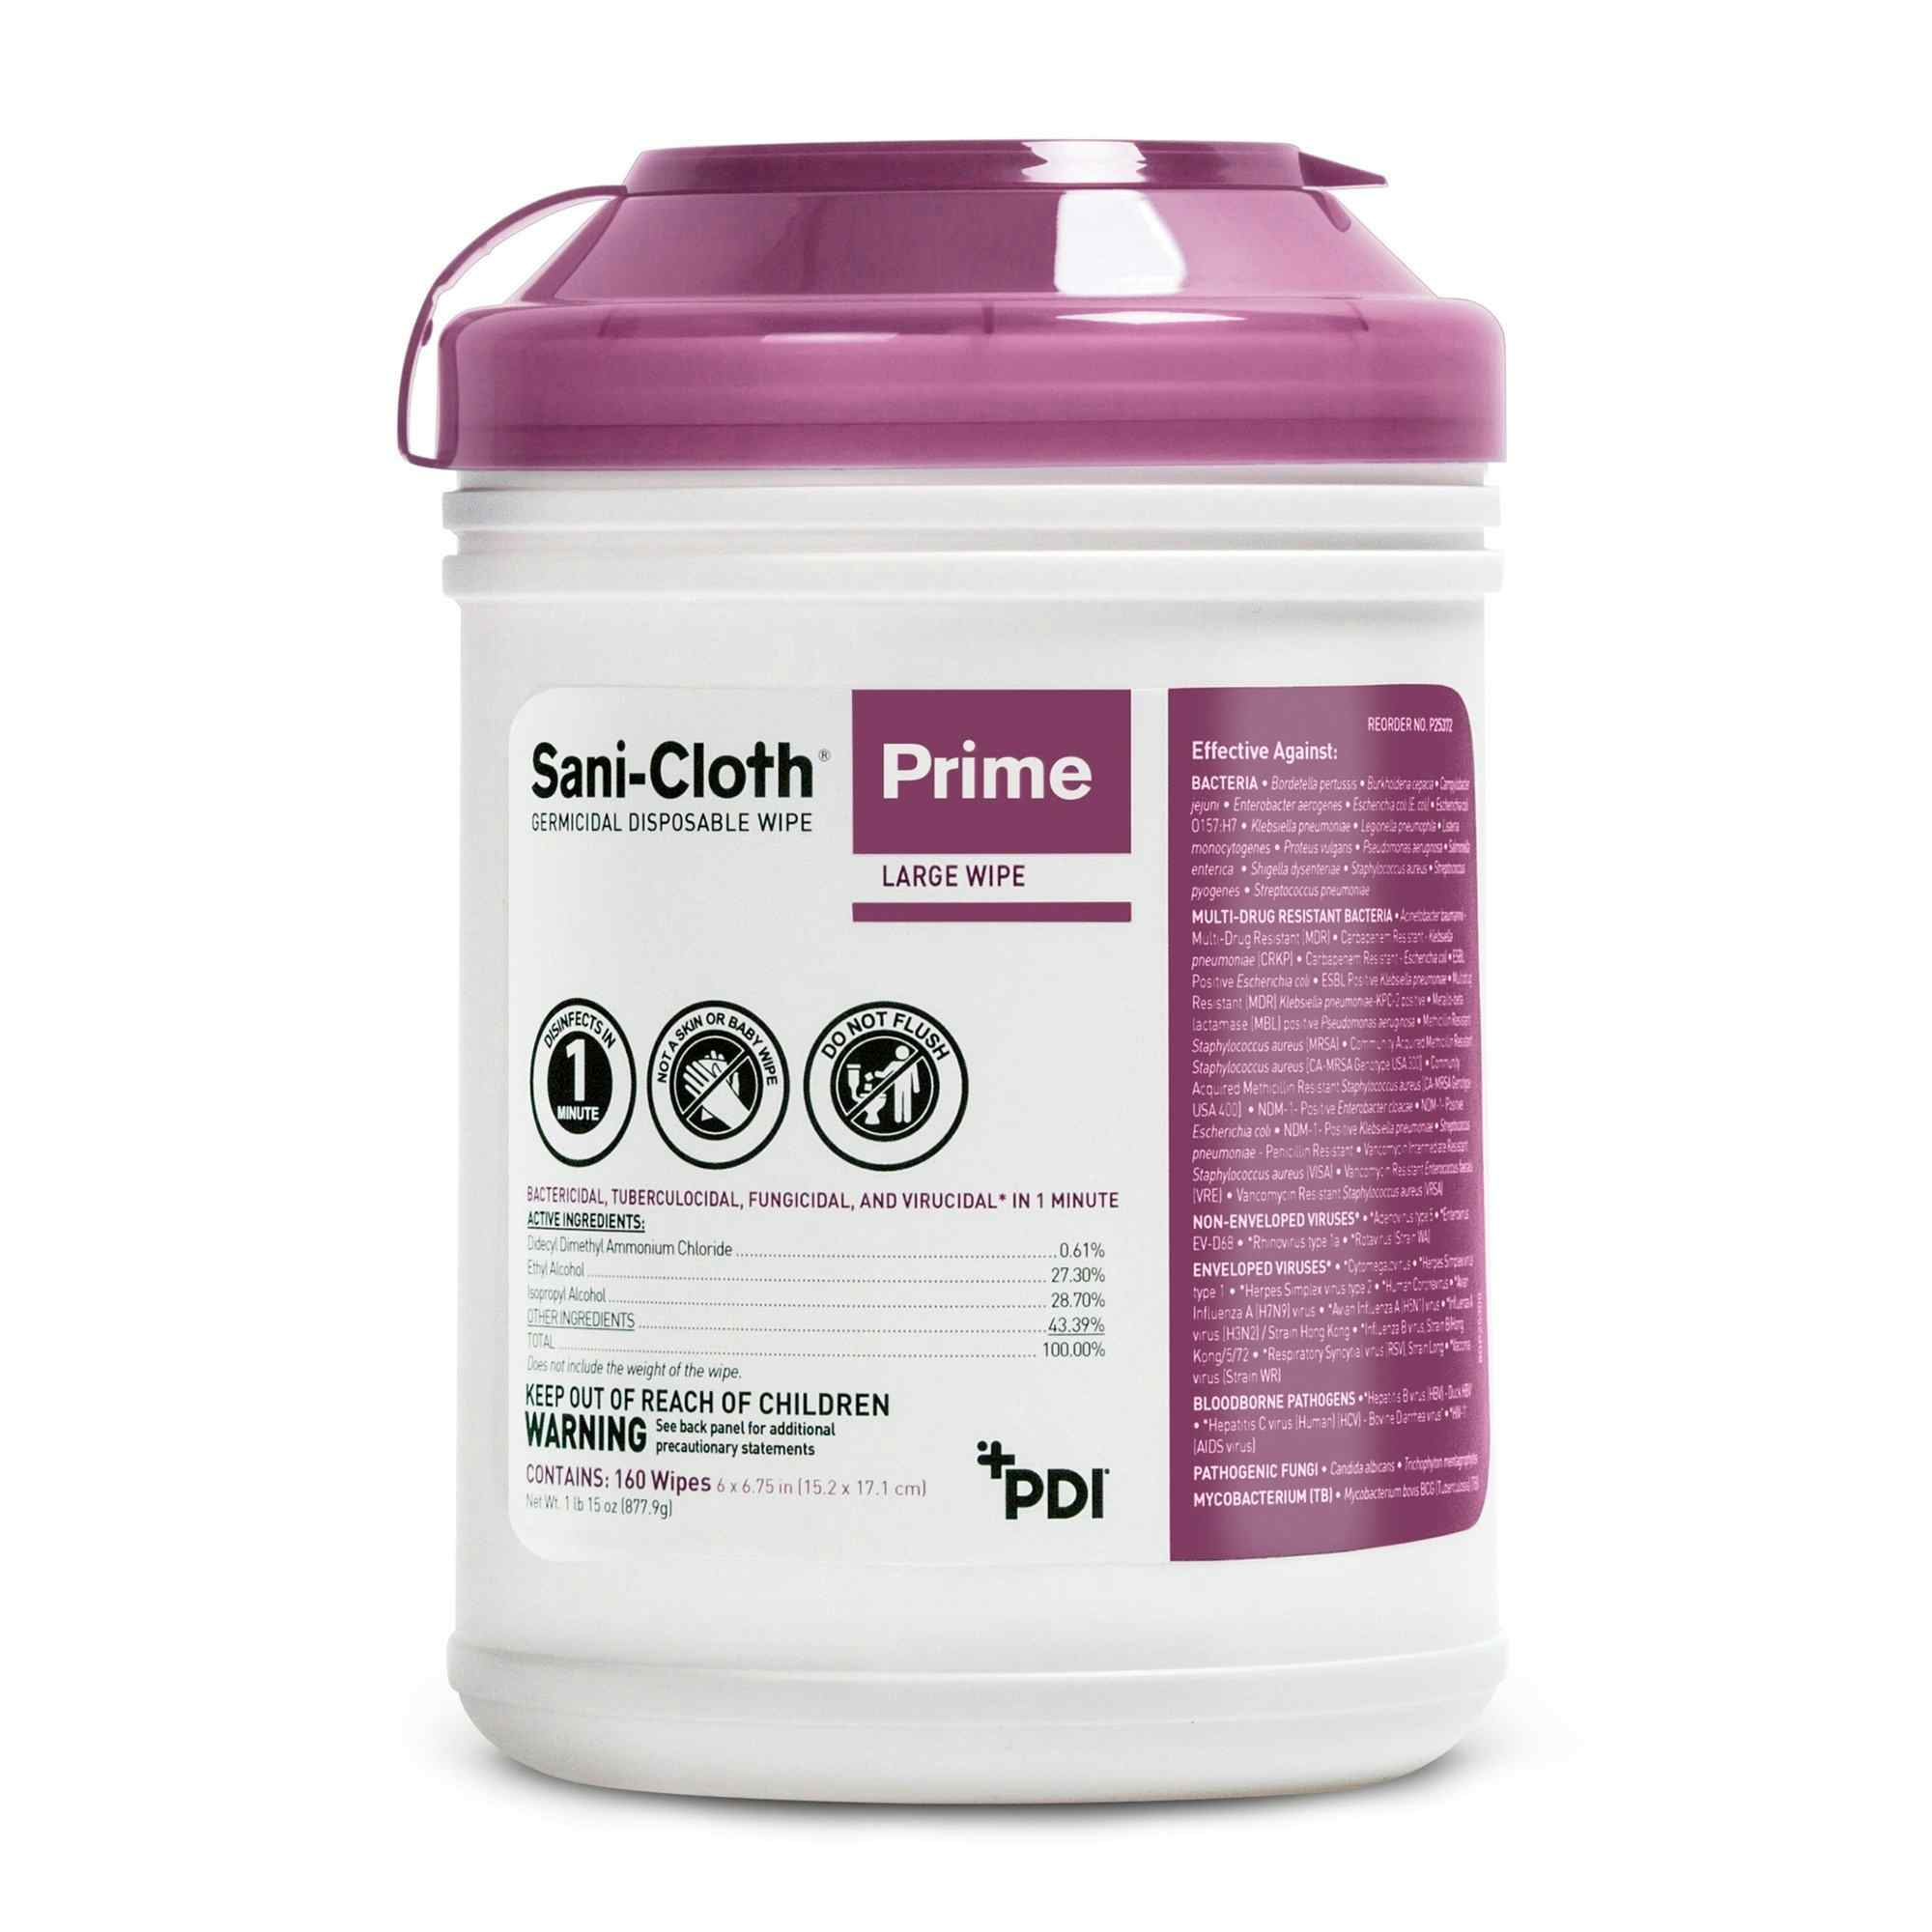 Sani-Cloth Prime Disposable Disinfectant Wipes, P25372, Case of 1920